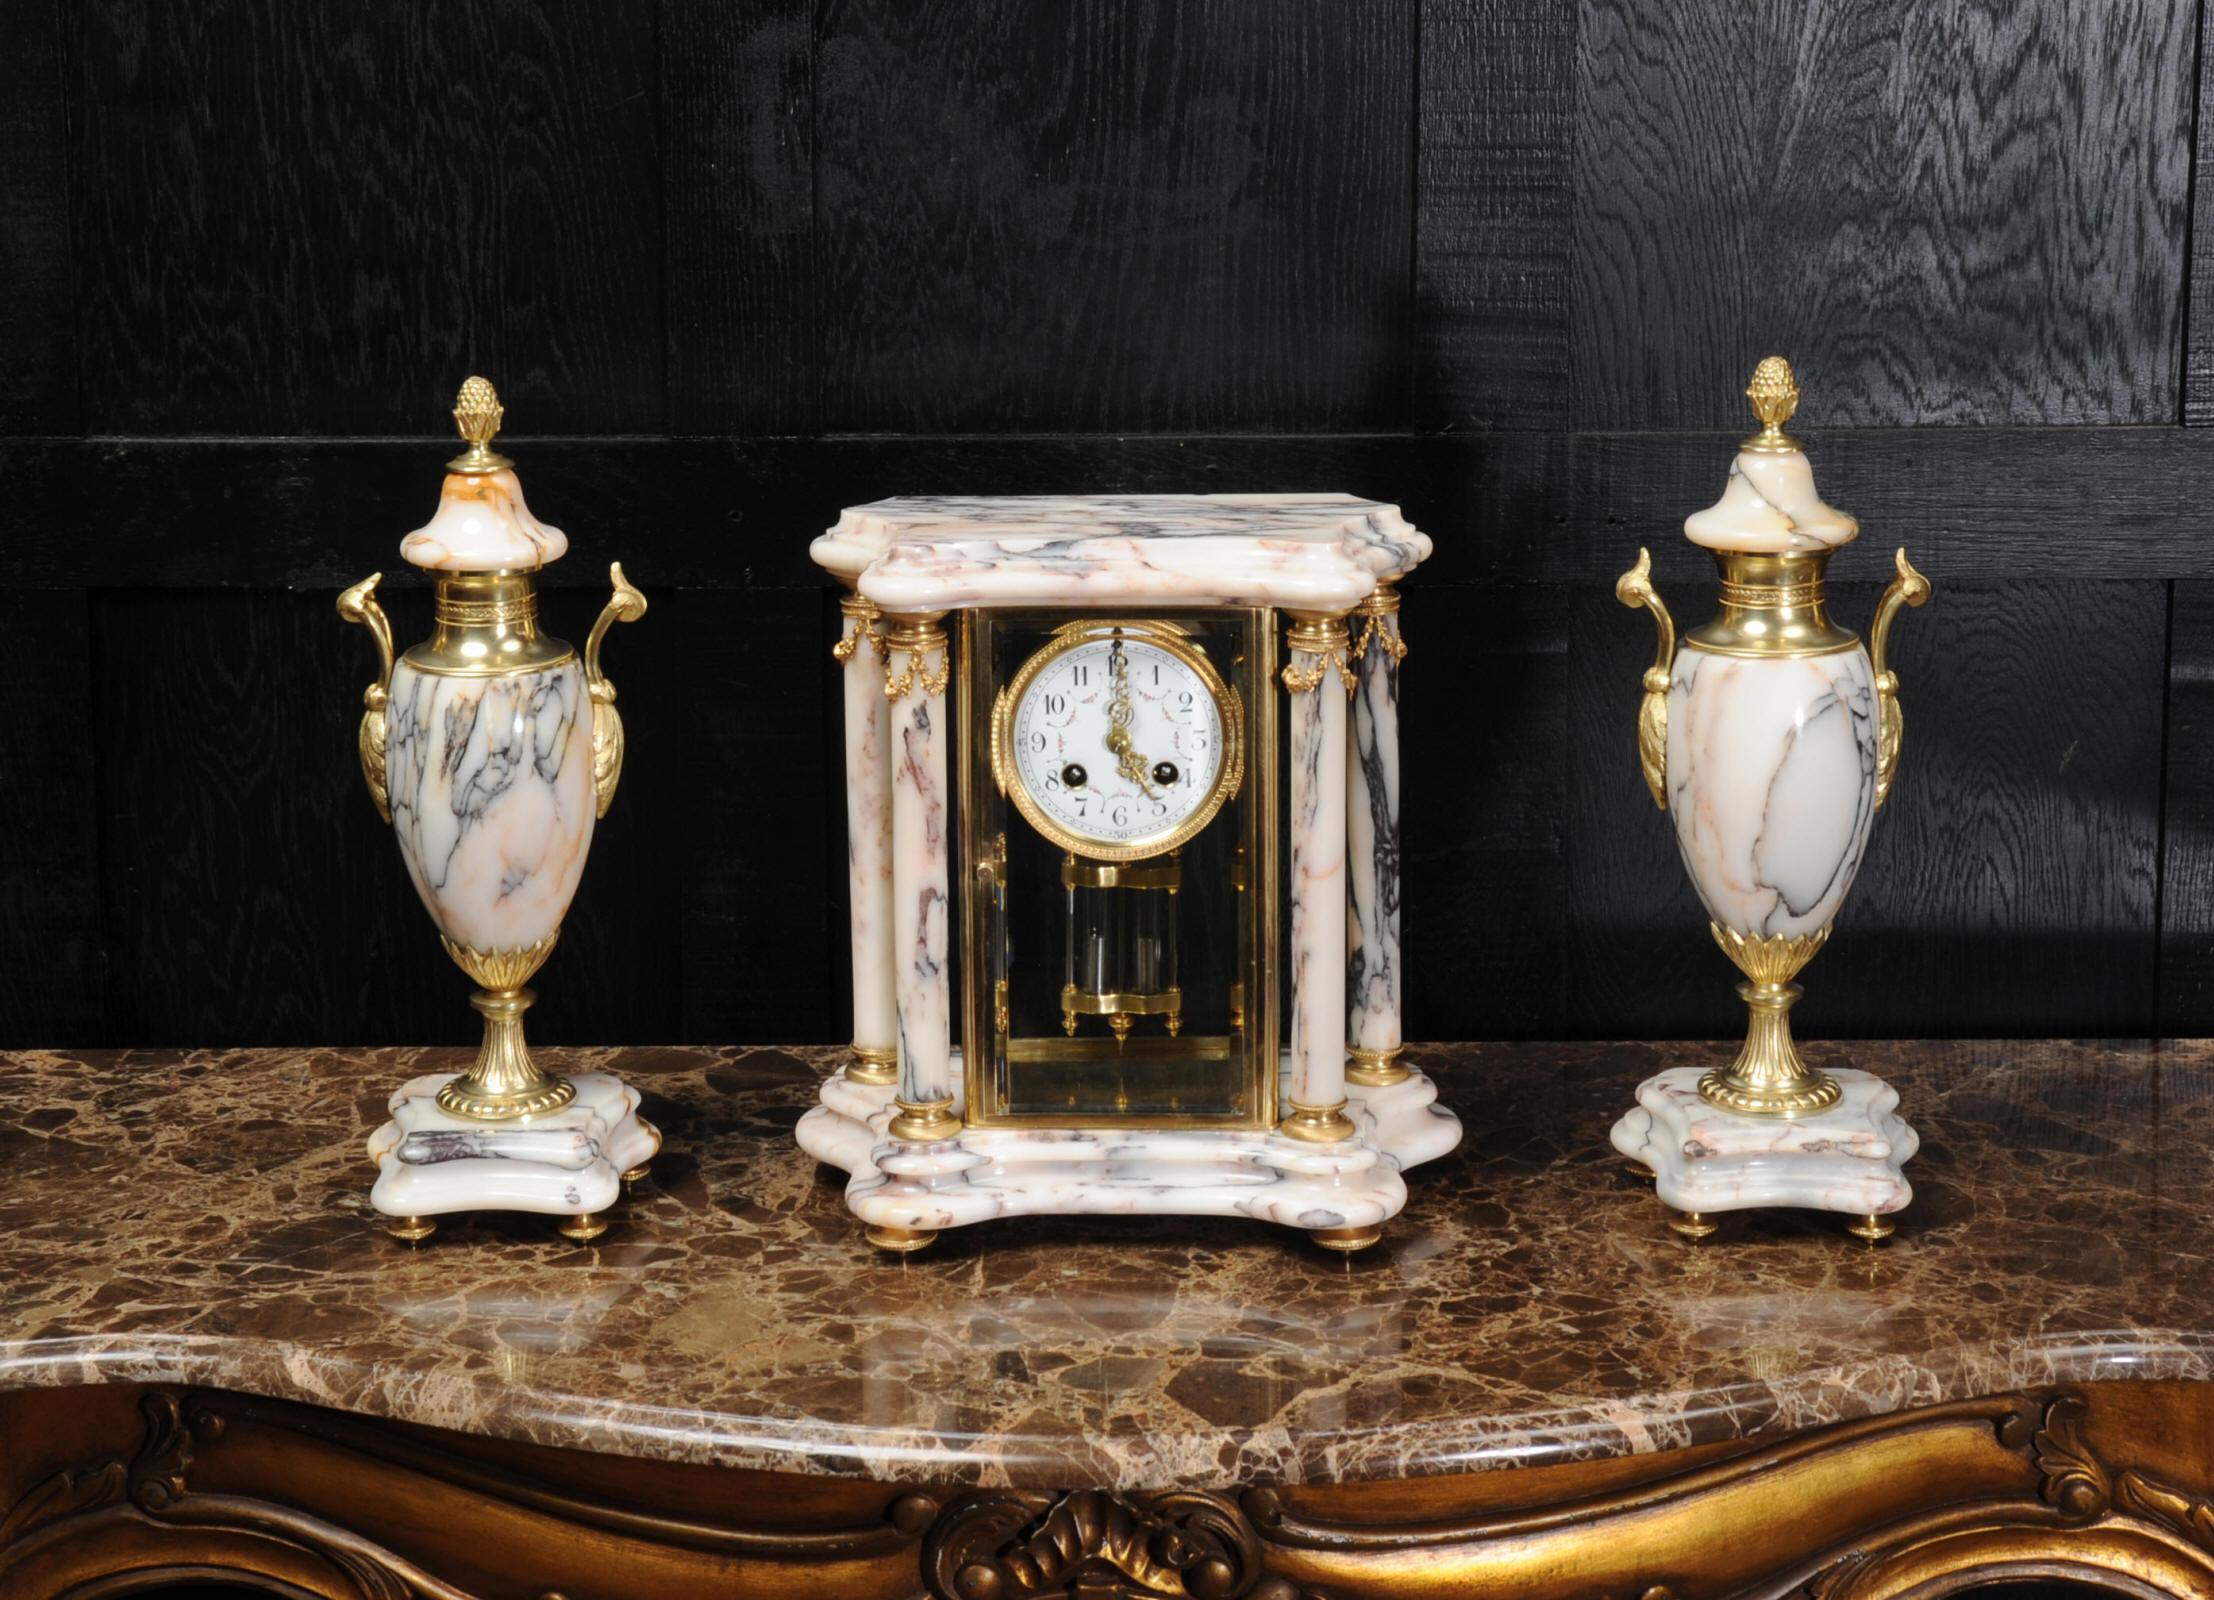 A beautiful original antique French four glass regulator clock set of the most beautiful variegated blue and orange specimen marble by Japy Freres. It is classical in style with four columns of marble and classical urns with pineapple finials.